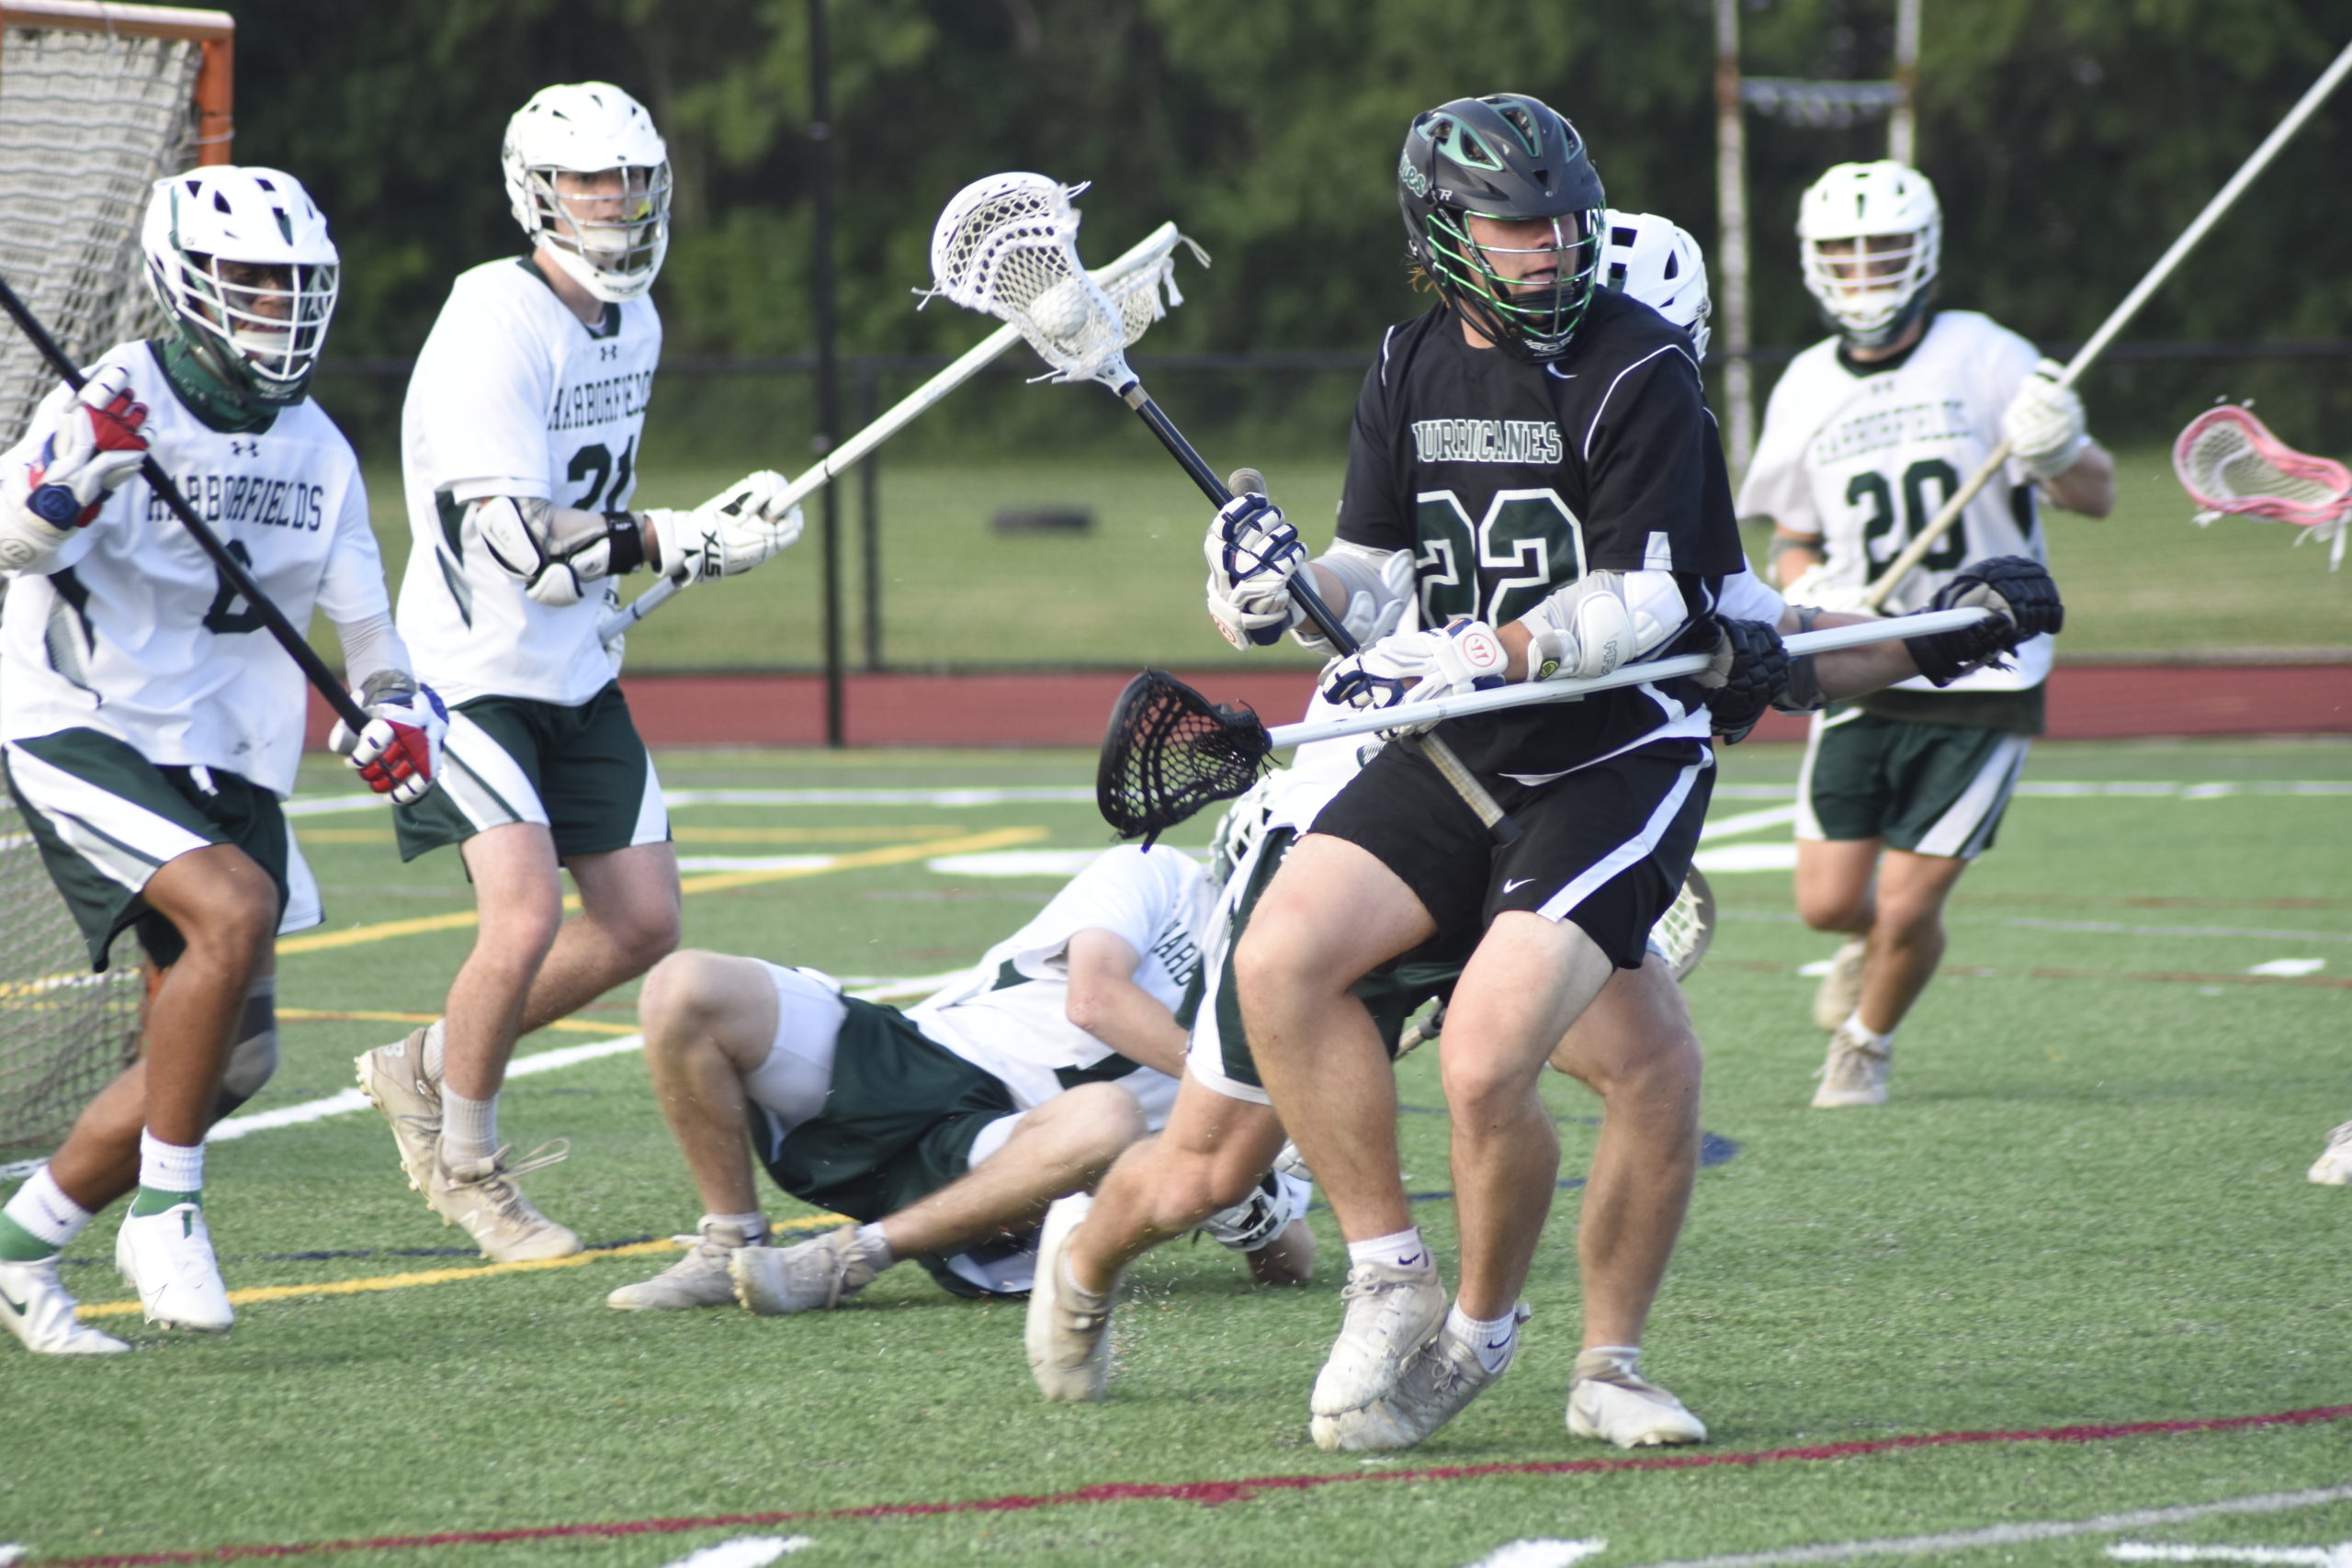 Jack Moloney of Westhampton Beach works against the Harborfields defense.